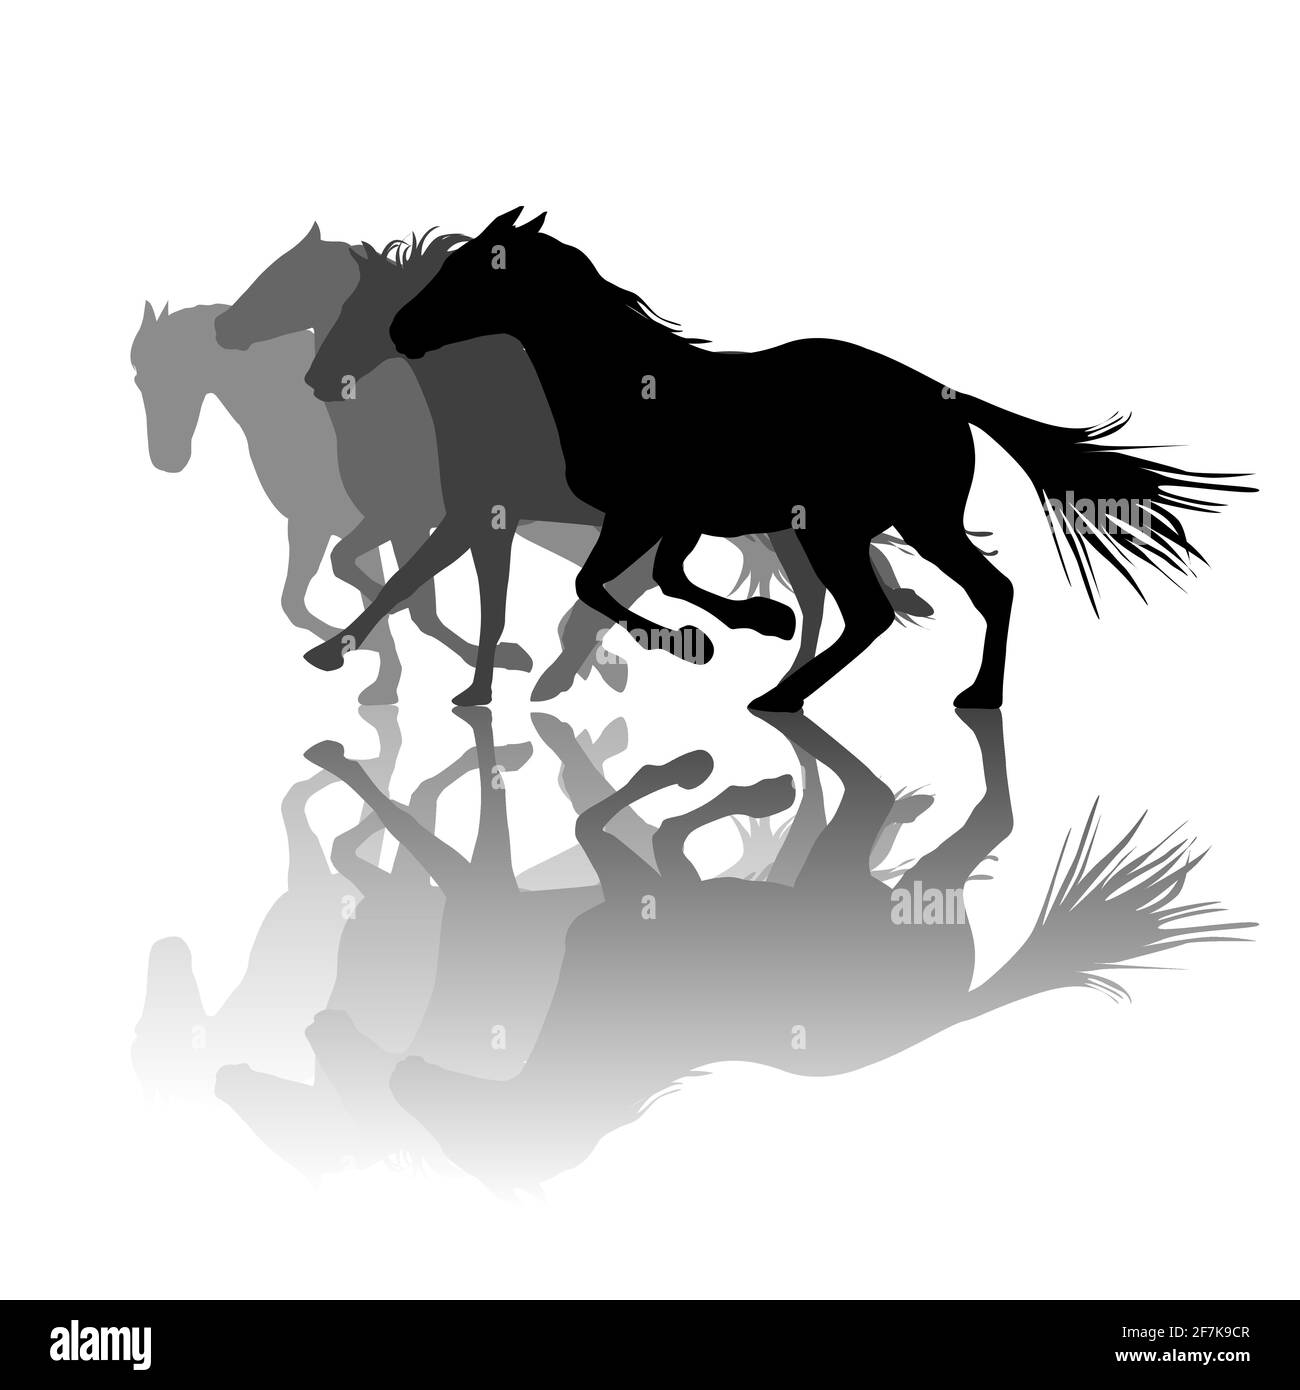 Freedom horses Stock Vector Images - Alamy